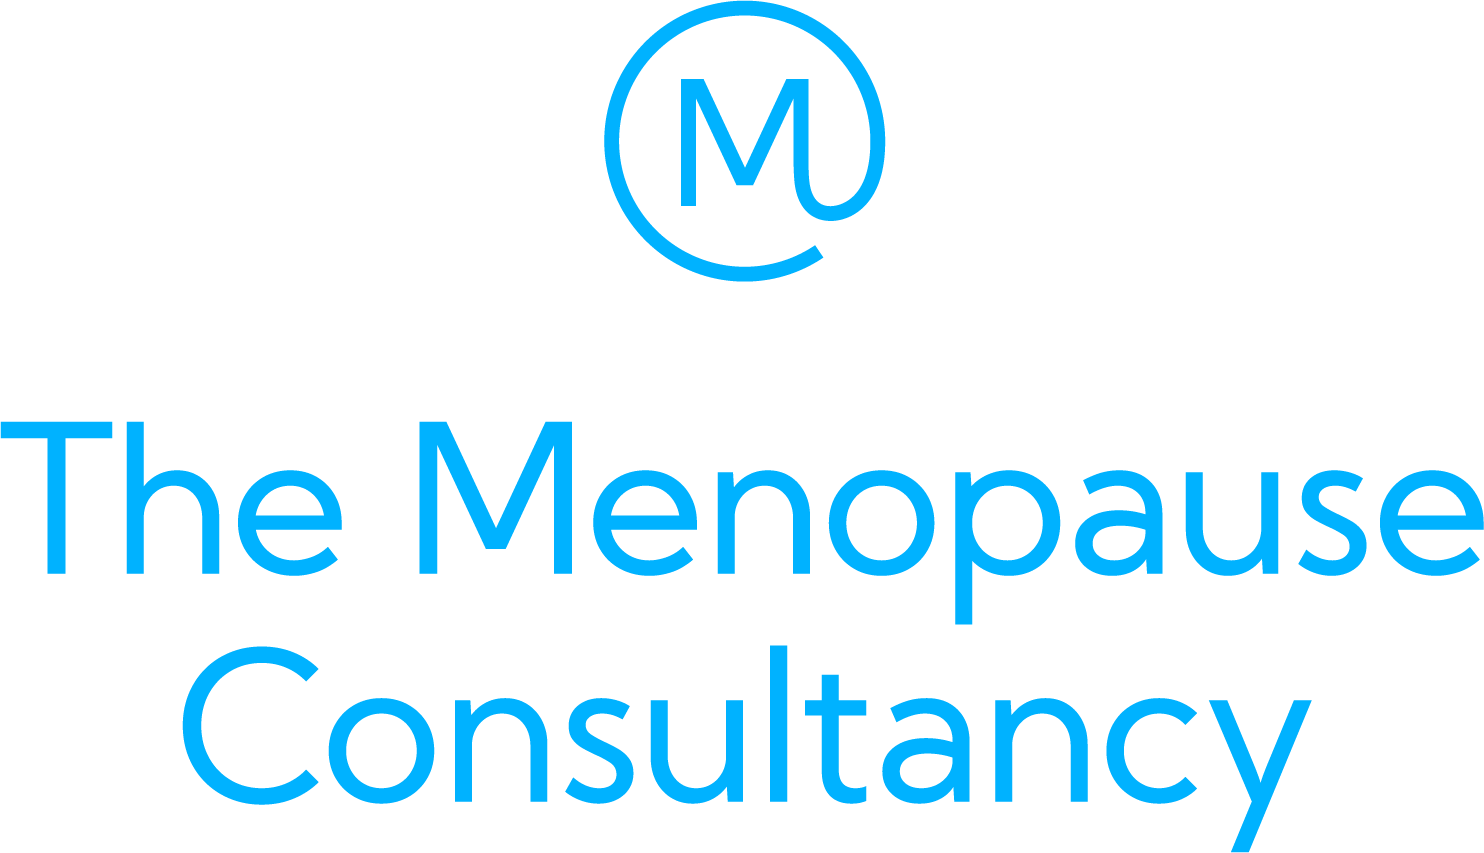 The Menopause Consultancy